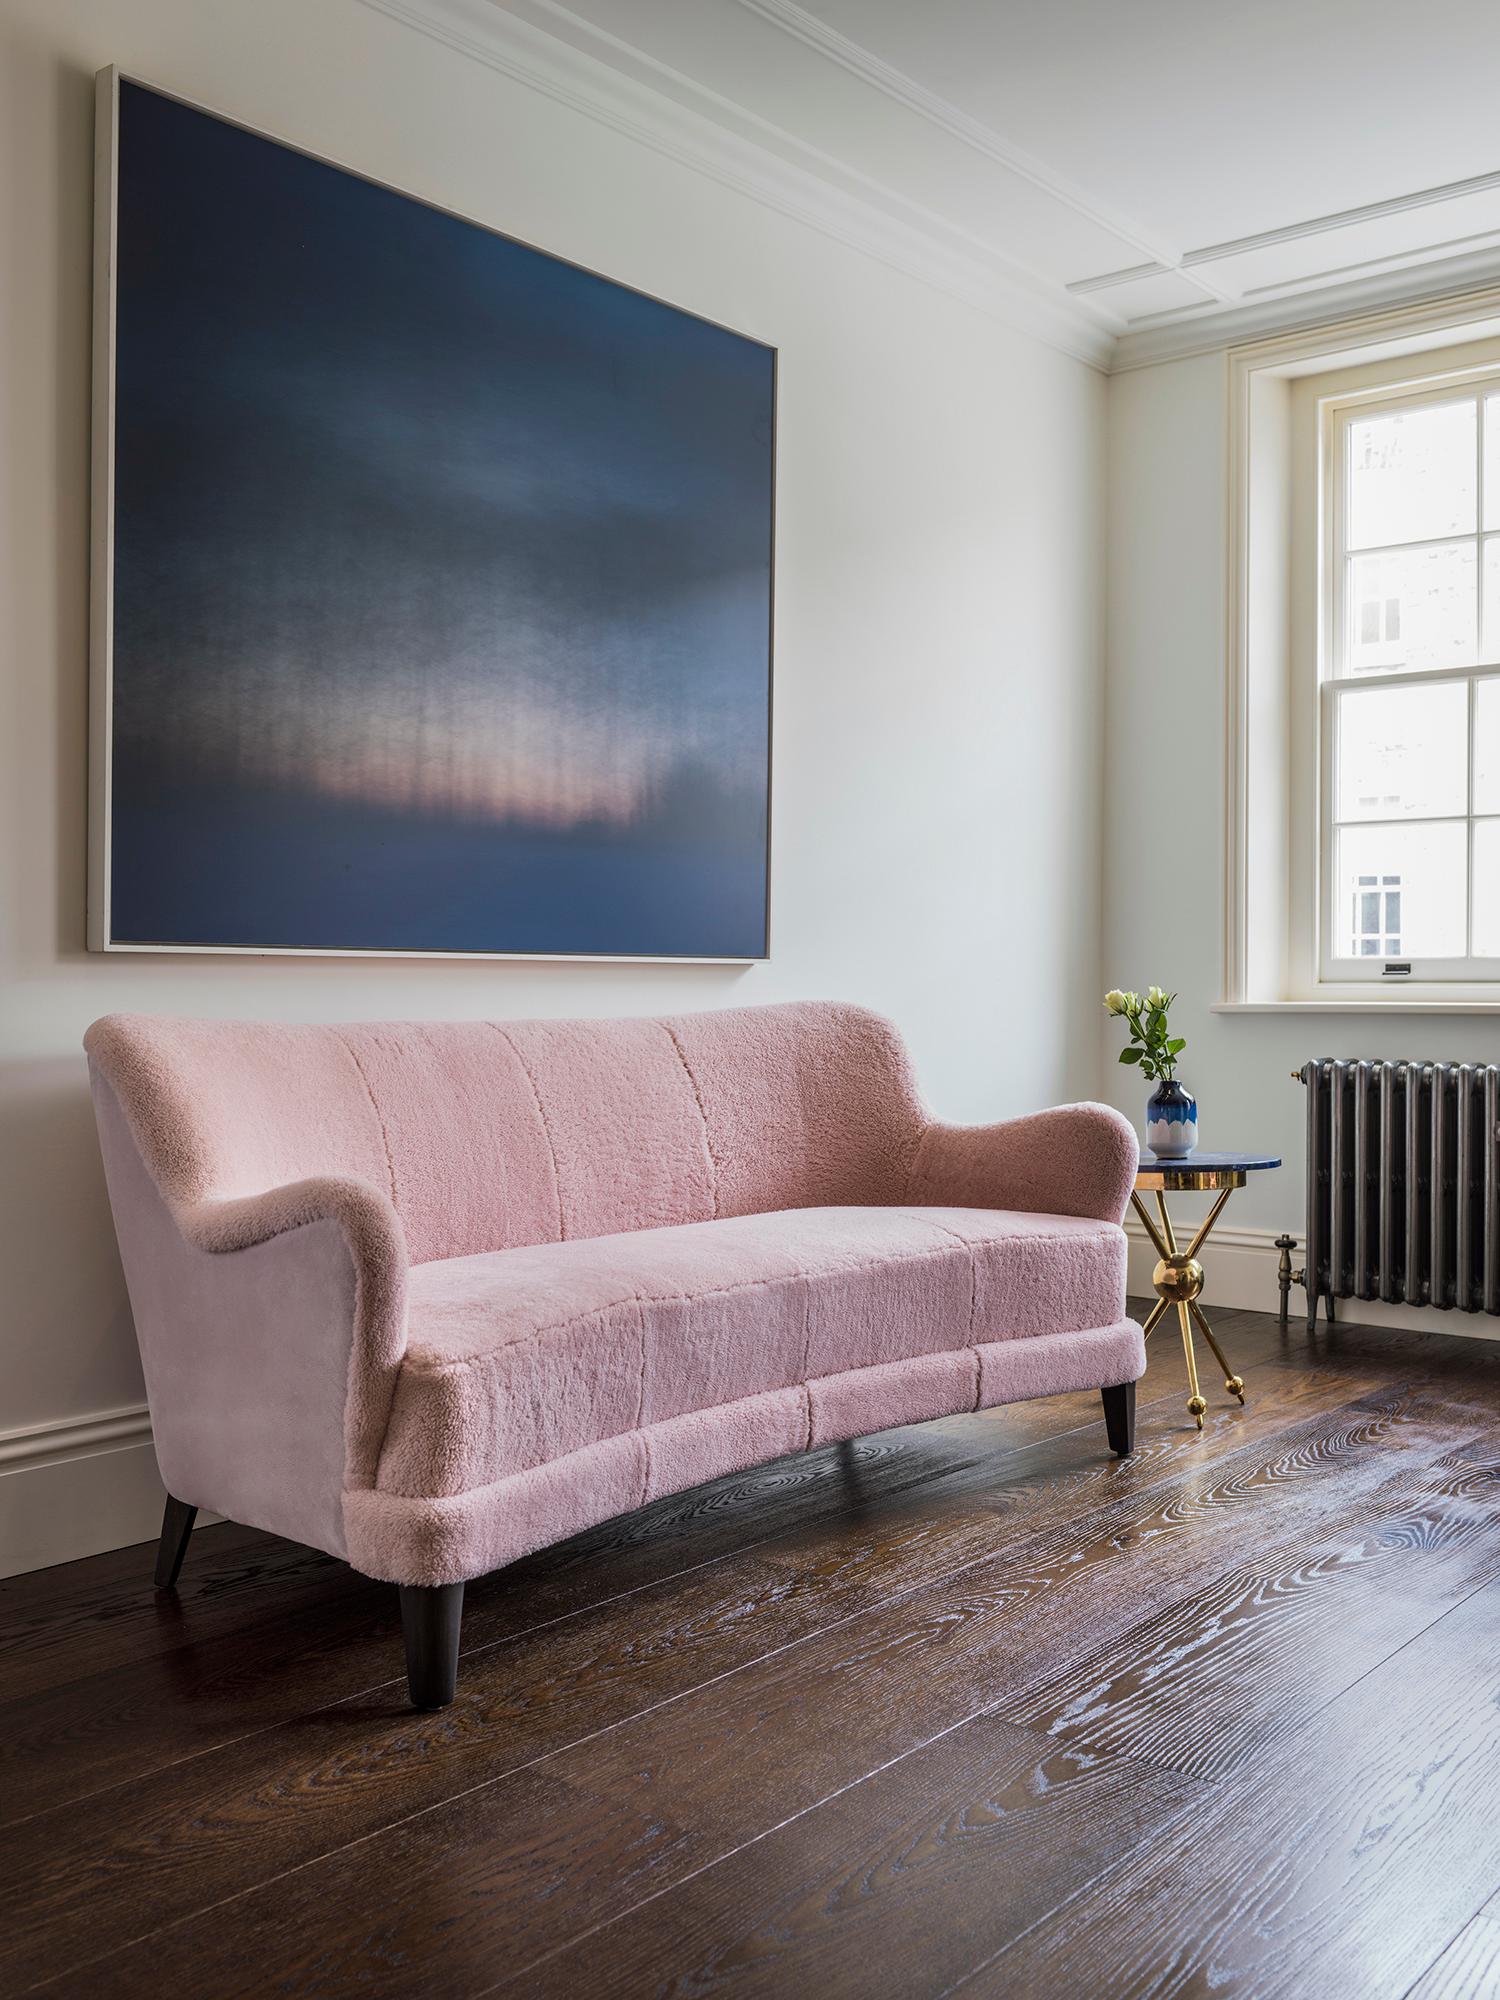 Elnaz Namaki Studio have created the Luuna Collection to bring warmth, comfort and soul to every home. The spirit of Luuna is to bring unique and unexpected objects into our lives. Luuna is inspired by Hygge - the heart of Danish culture describing